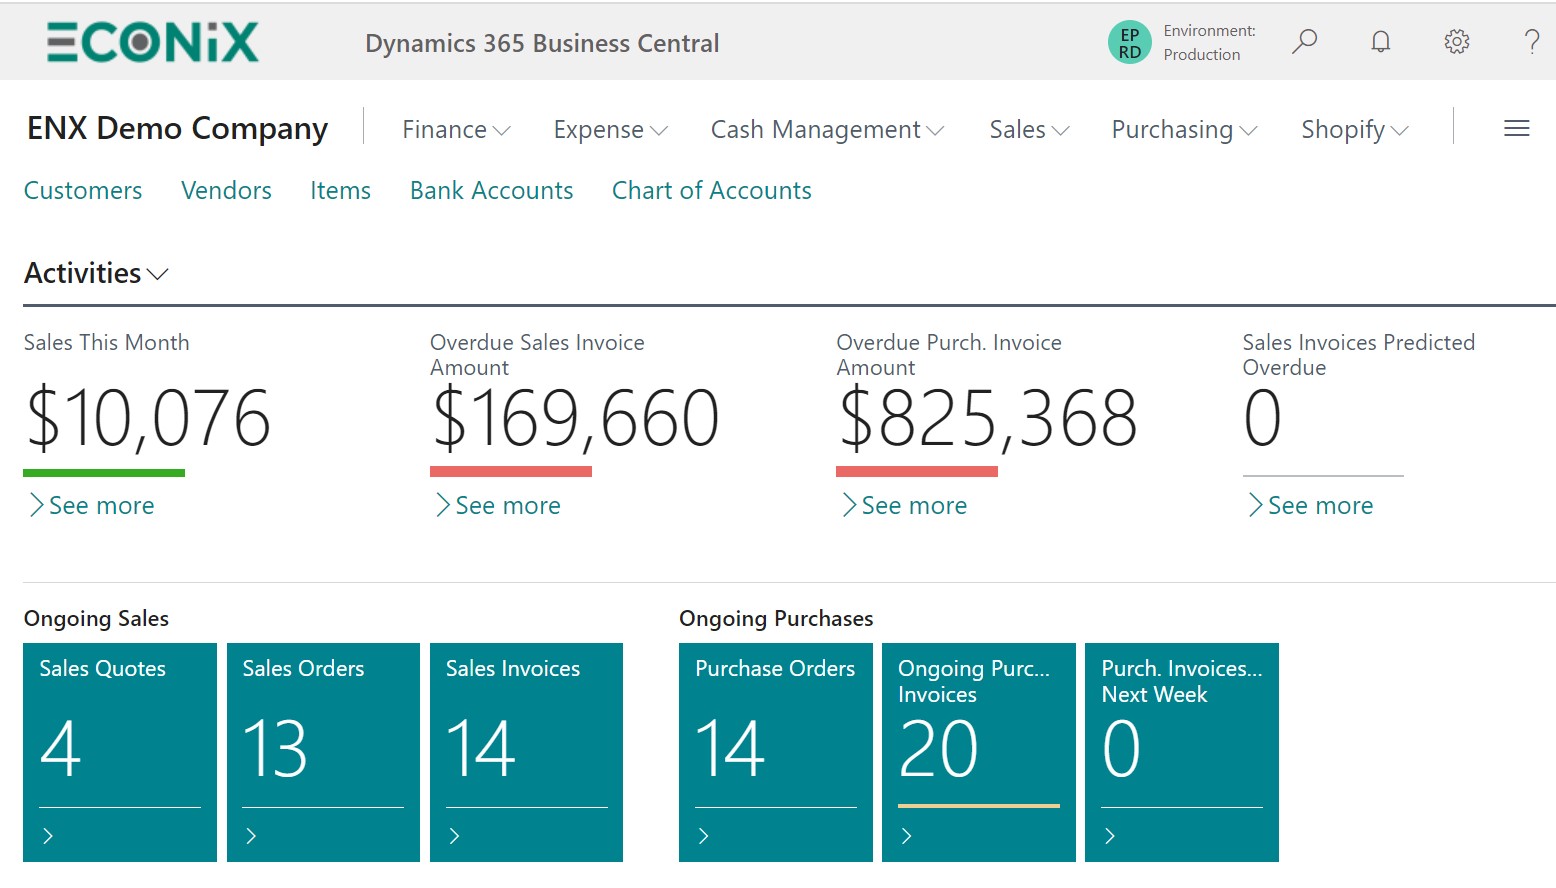 Business Functionality Supported by Dynamics 365 Business Central